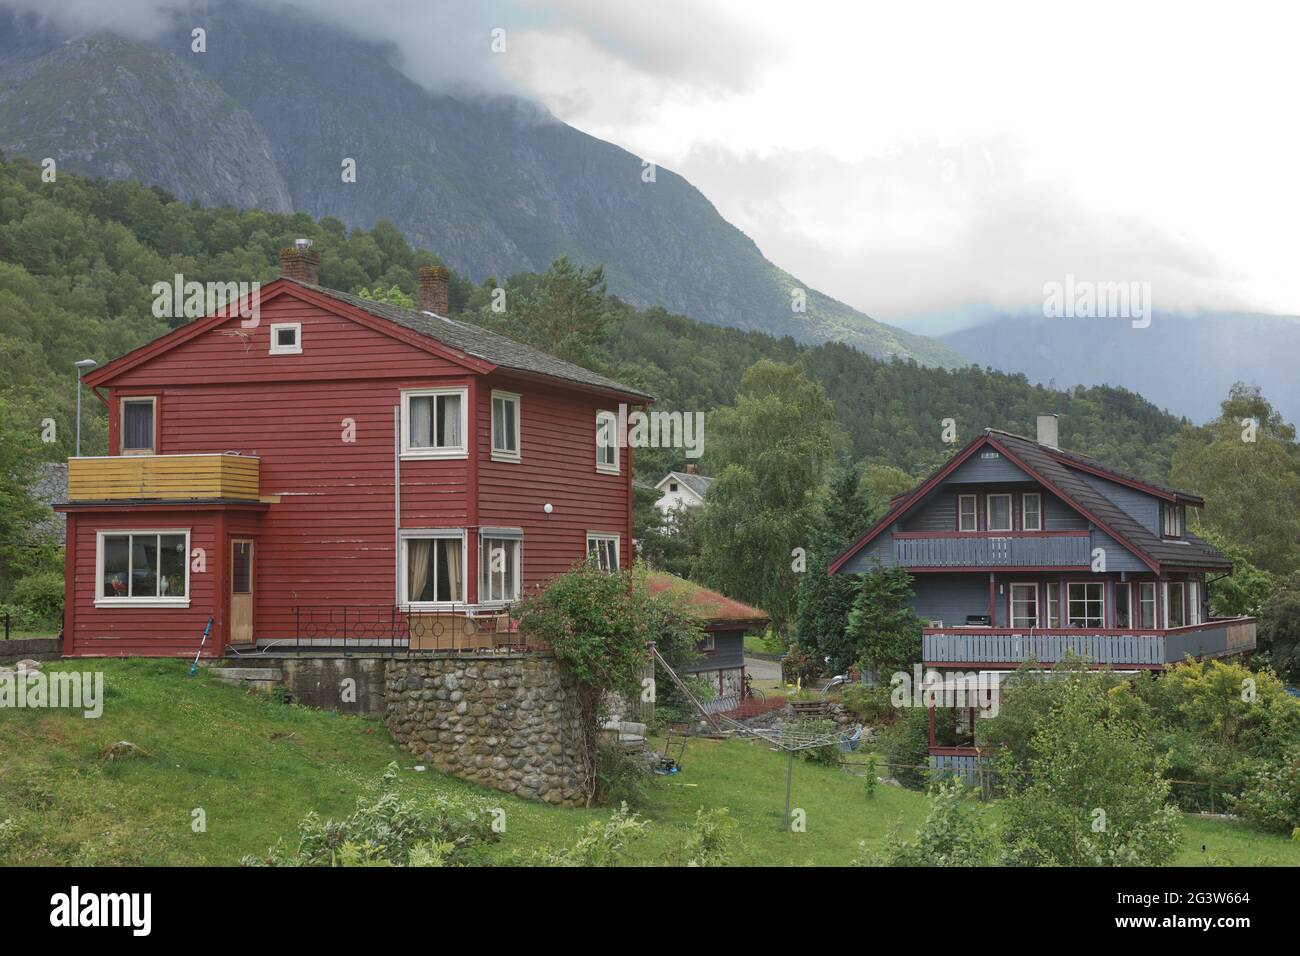 The village of Eidfjord in Norway is a major cruise ship port of call. It is situated at the end of Stock Photo